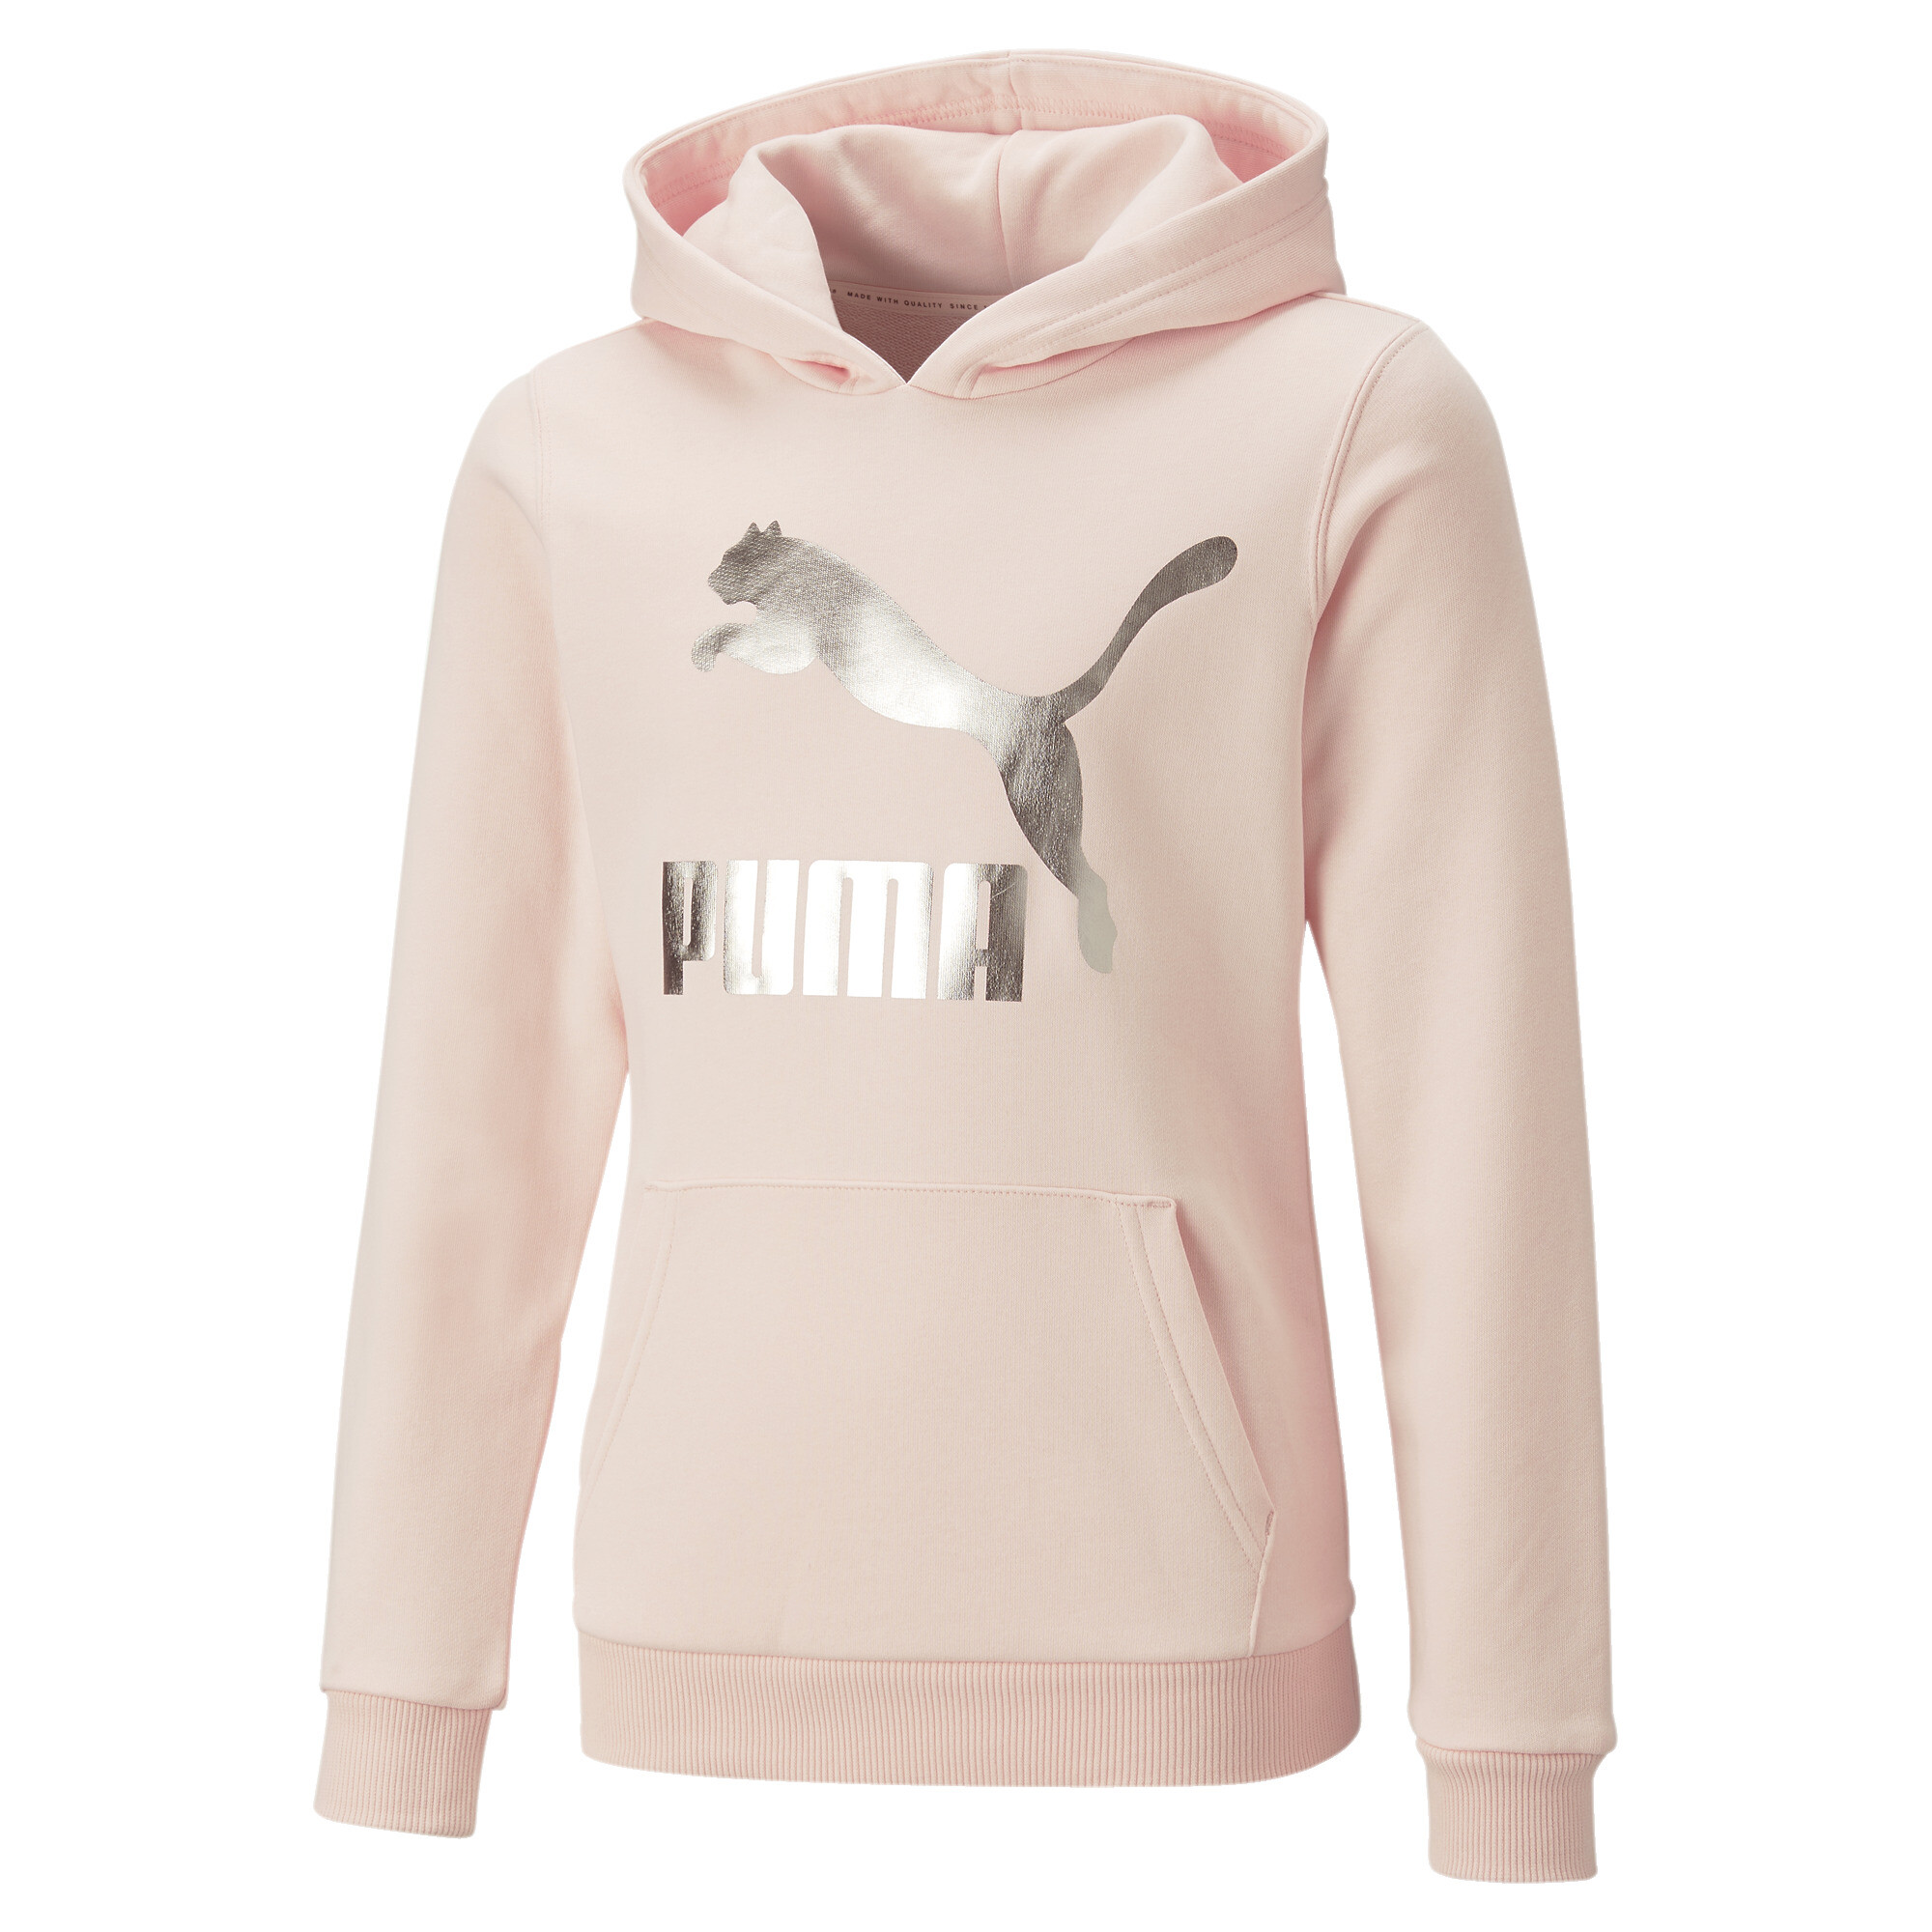 PUMA Classics Logo Hoodie In 70 - Pink, Size 15-16 Youth